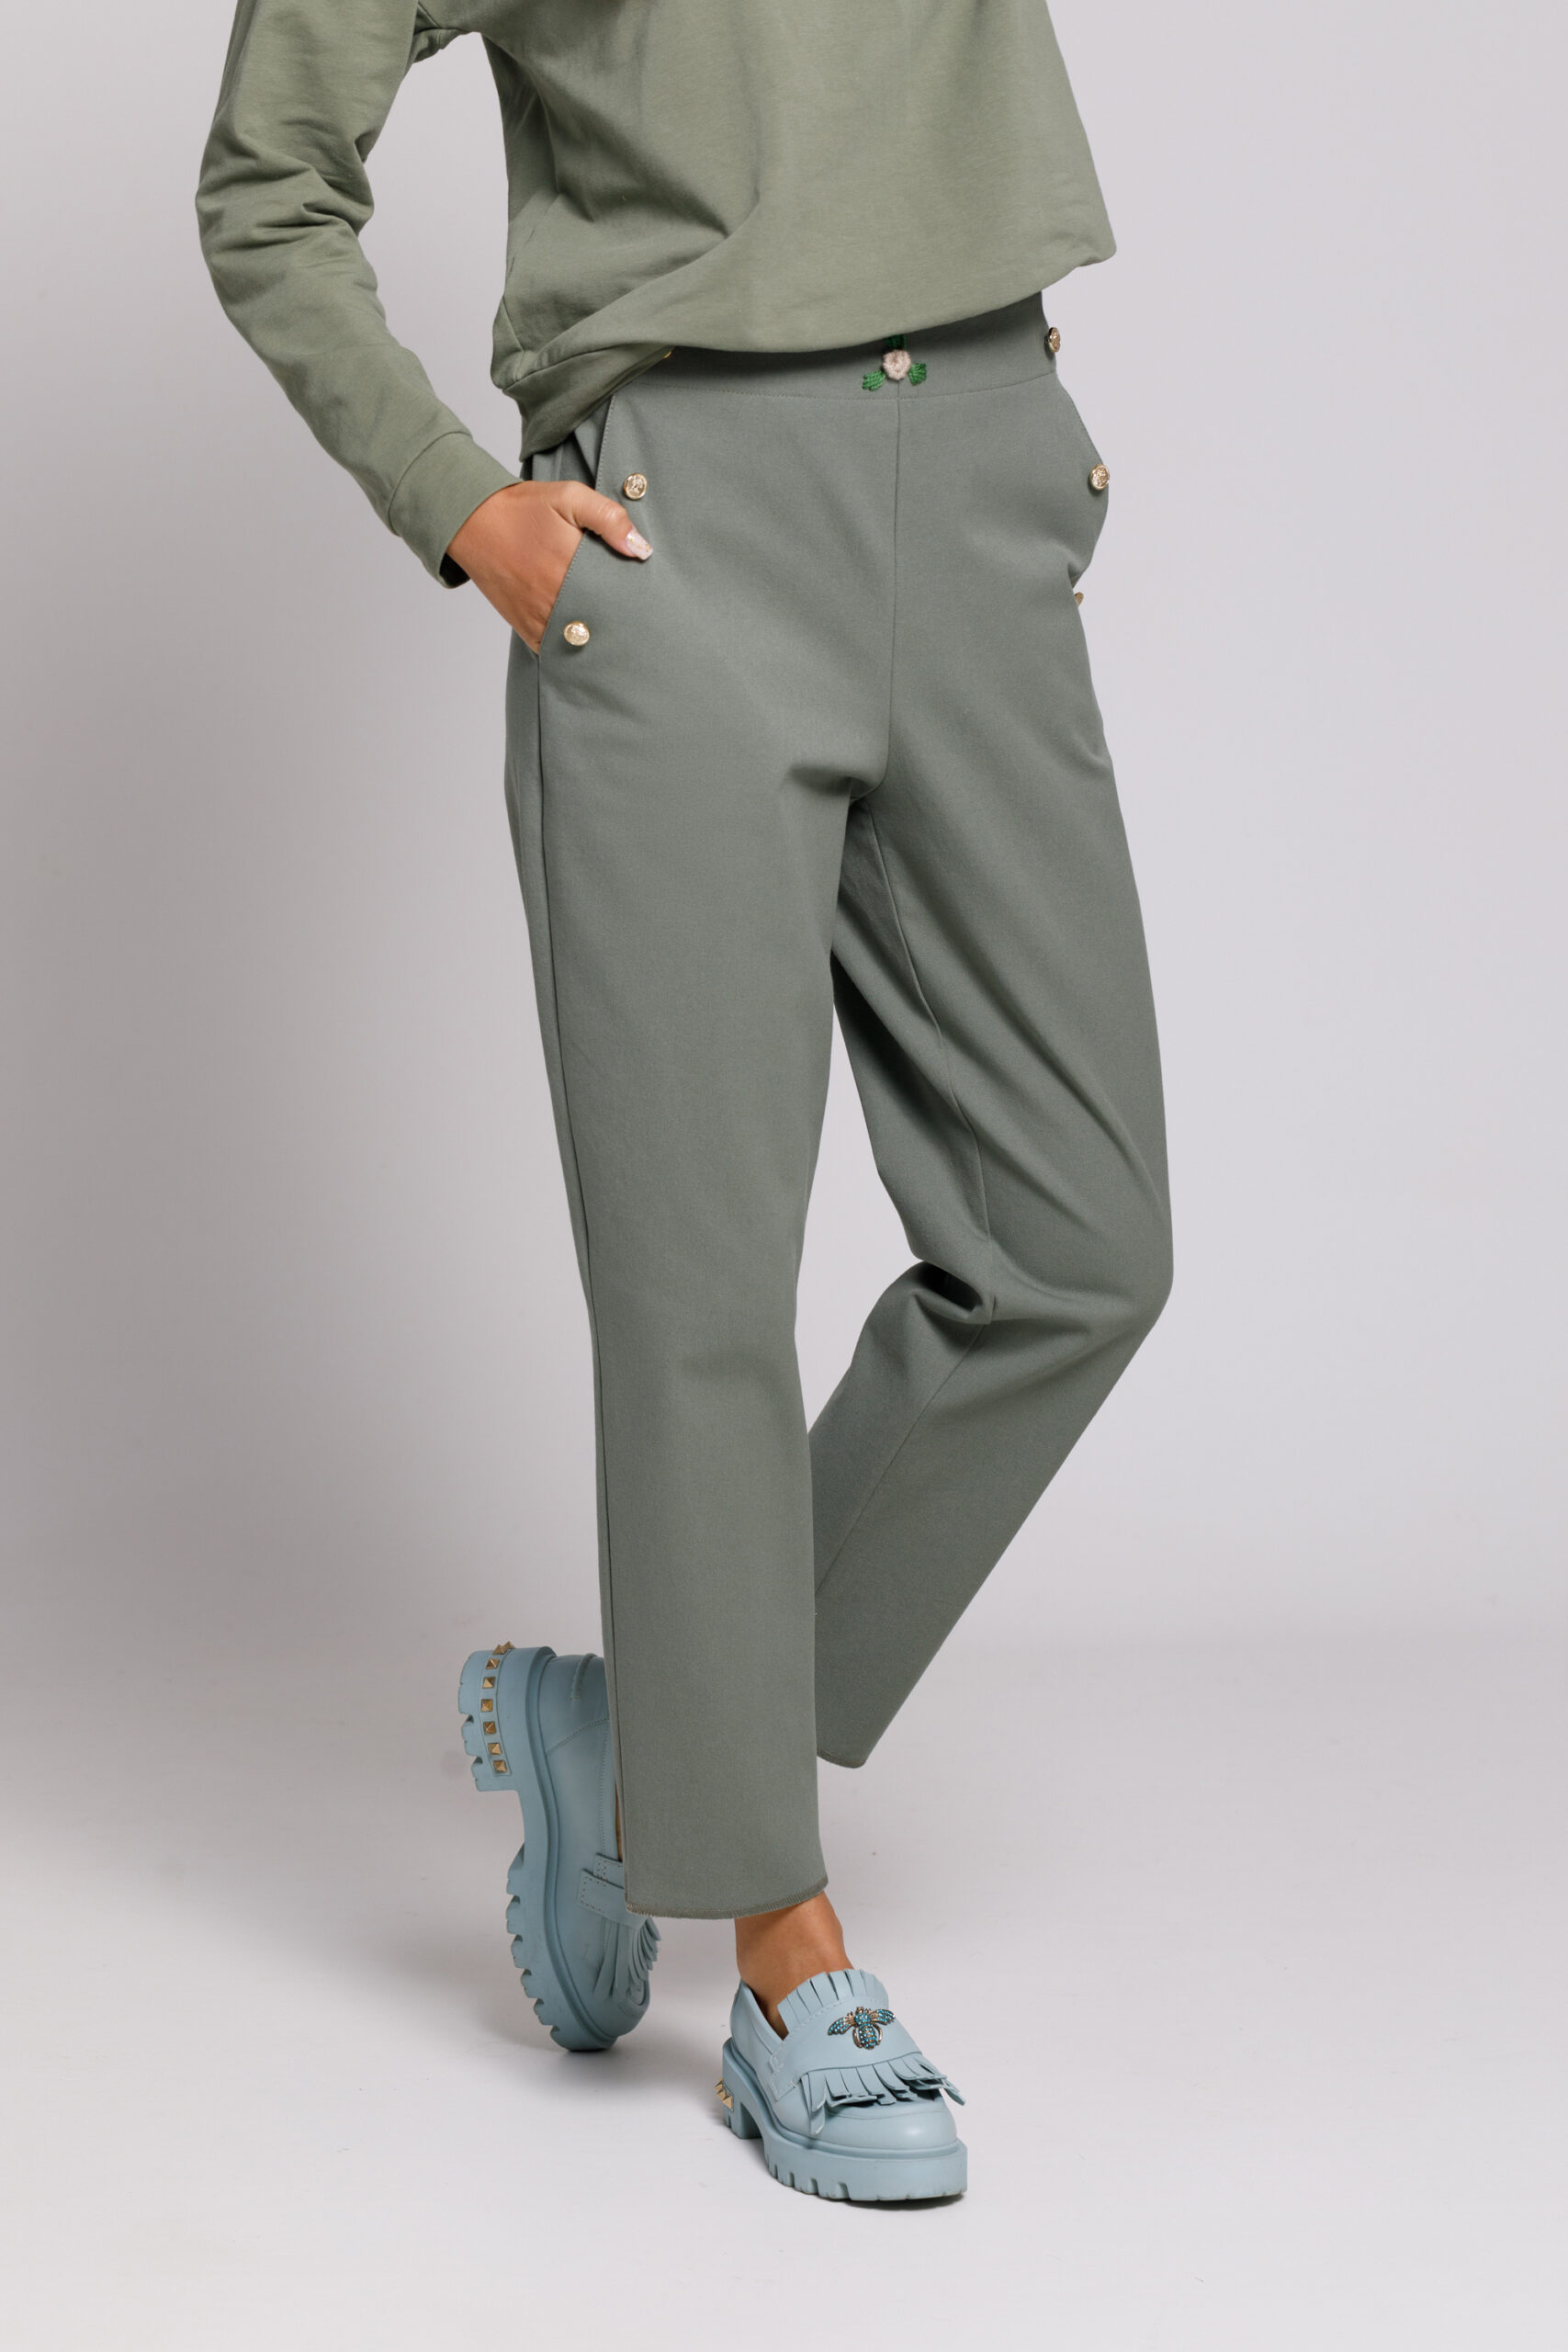 RADA casual olive pants with gold buttons. Natural fabrics, original design, handmade embroidery